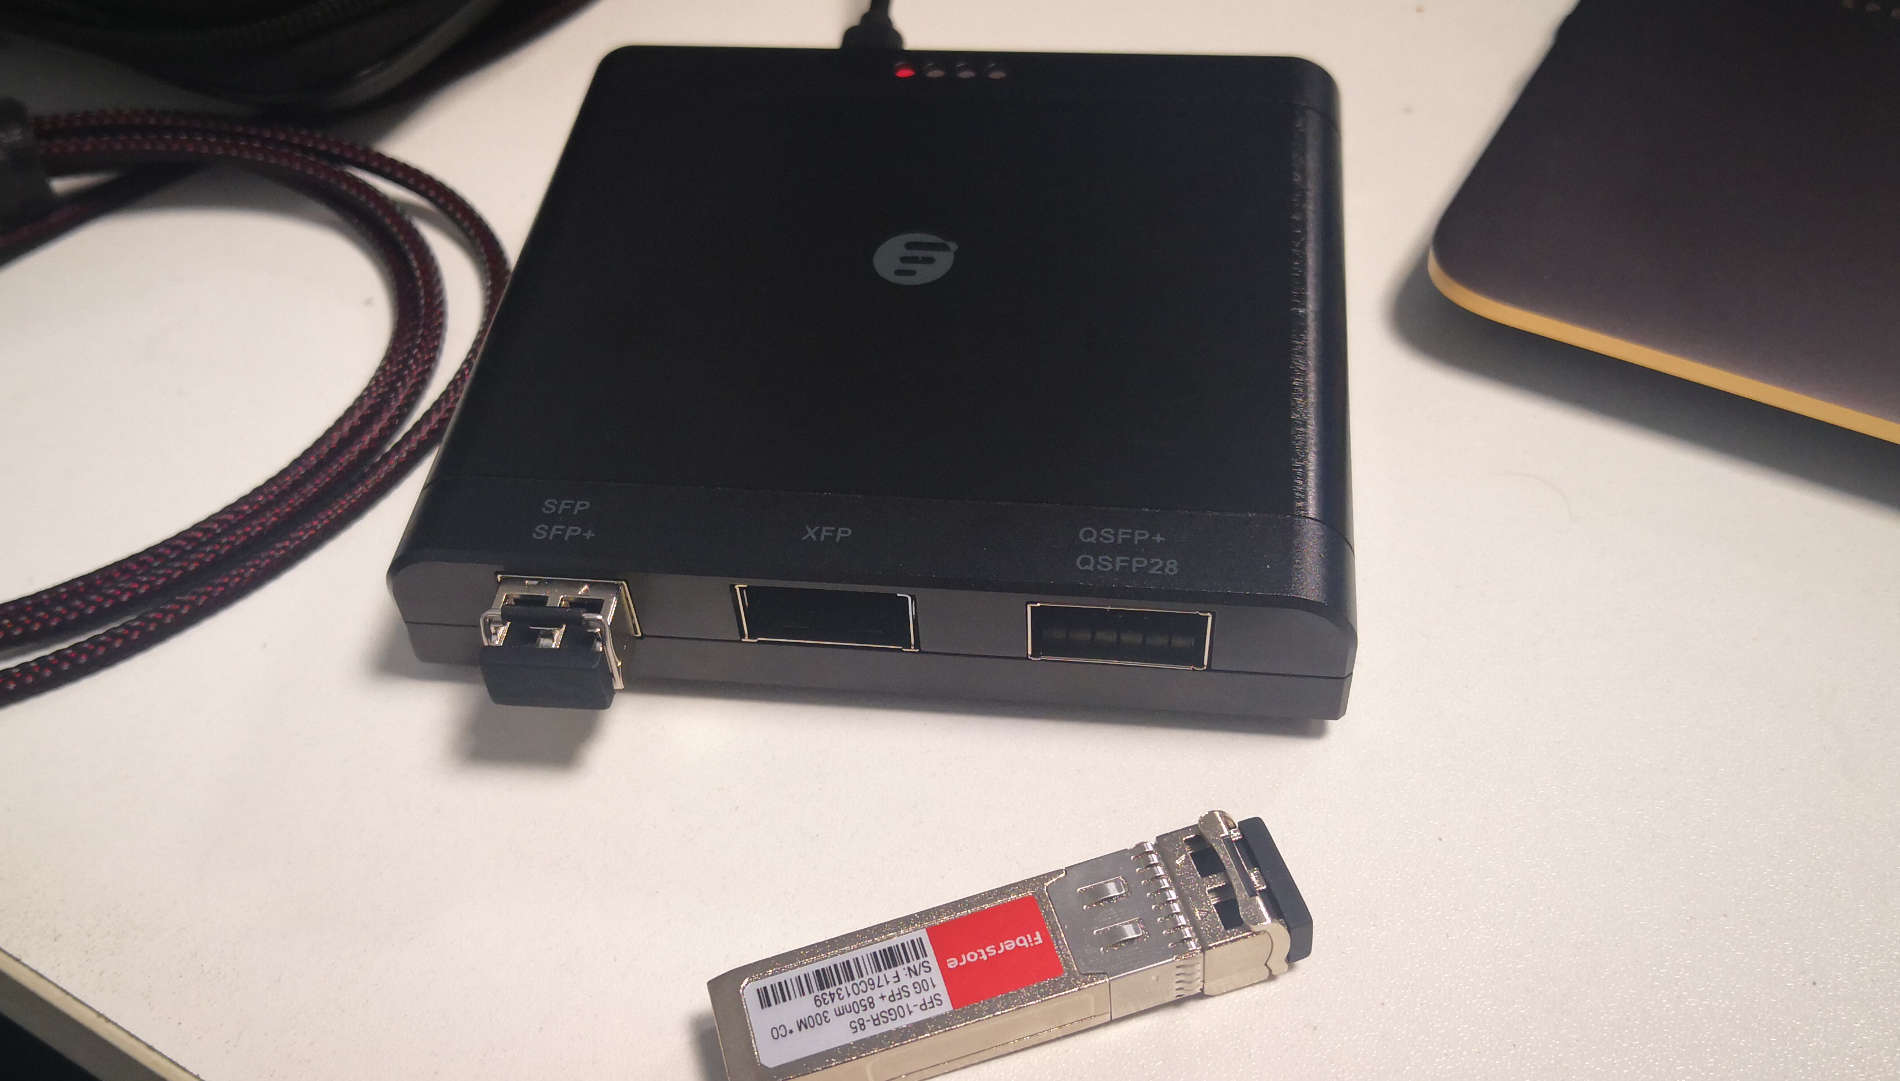 Tip: Re-Encode SFP/SFP+, XFP and QSFP+/QSFP28 Transceivers from FiberStore using the FS Box!